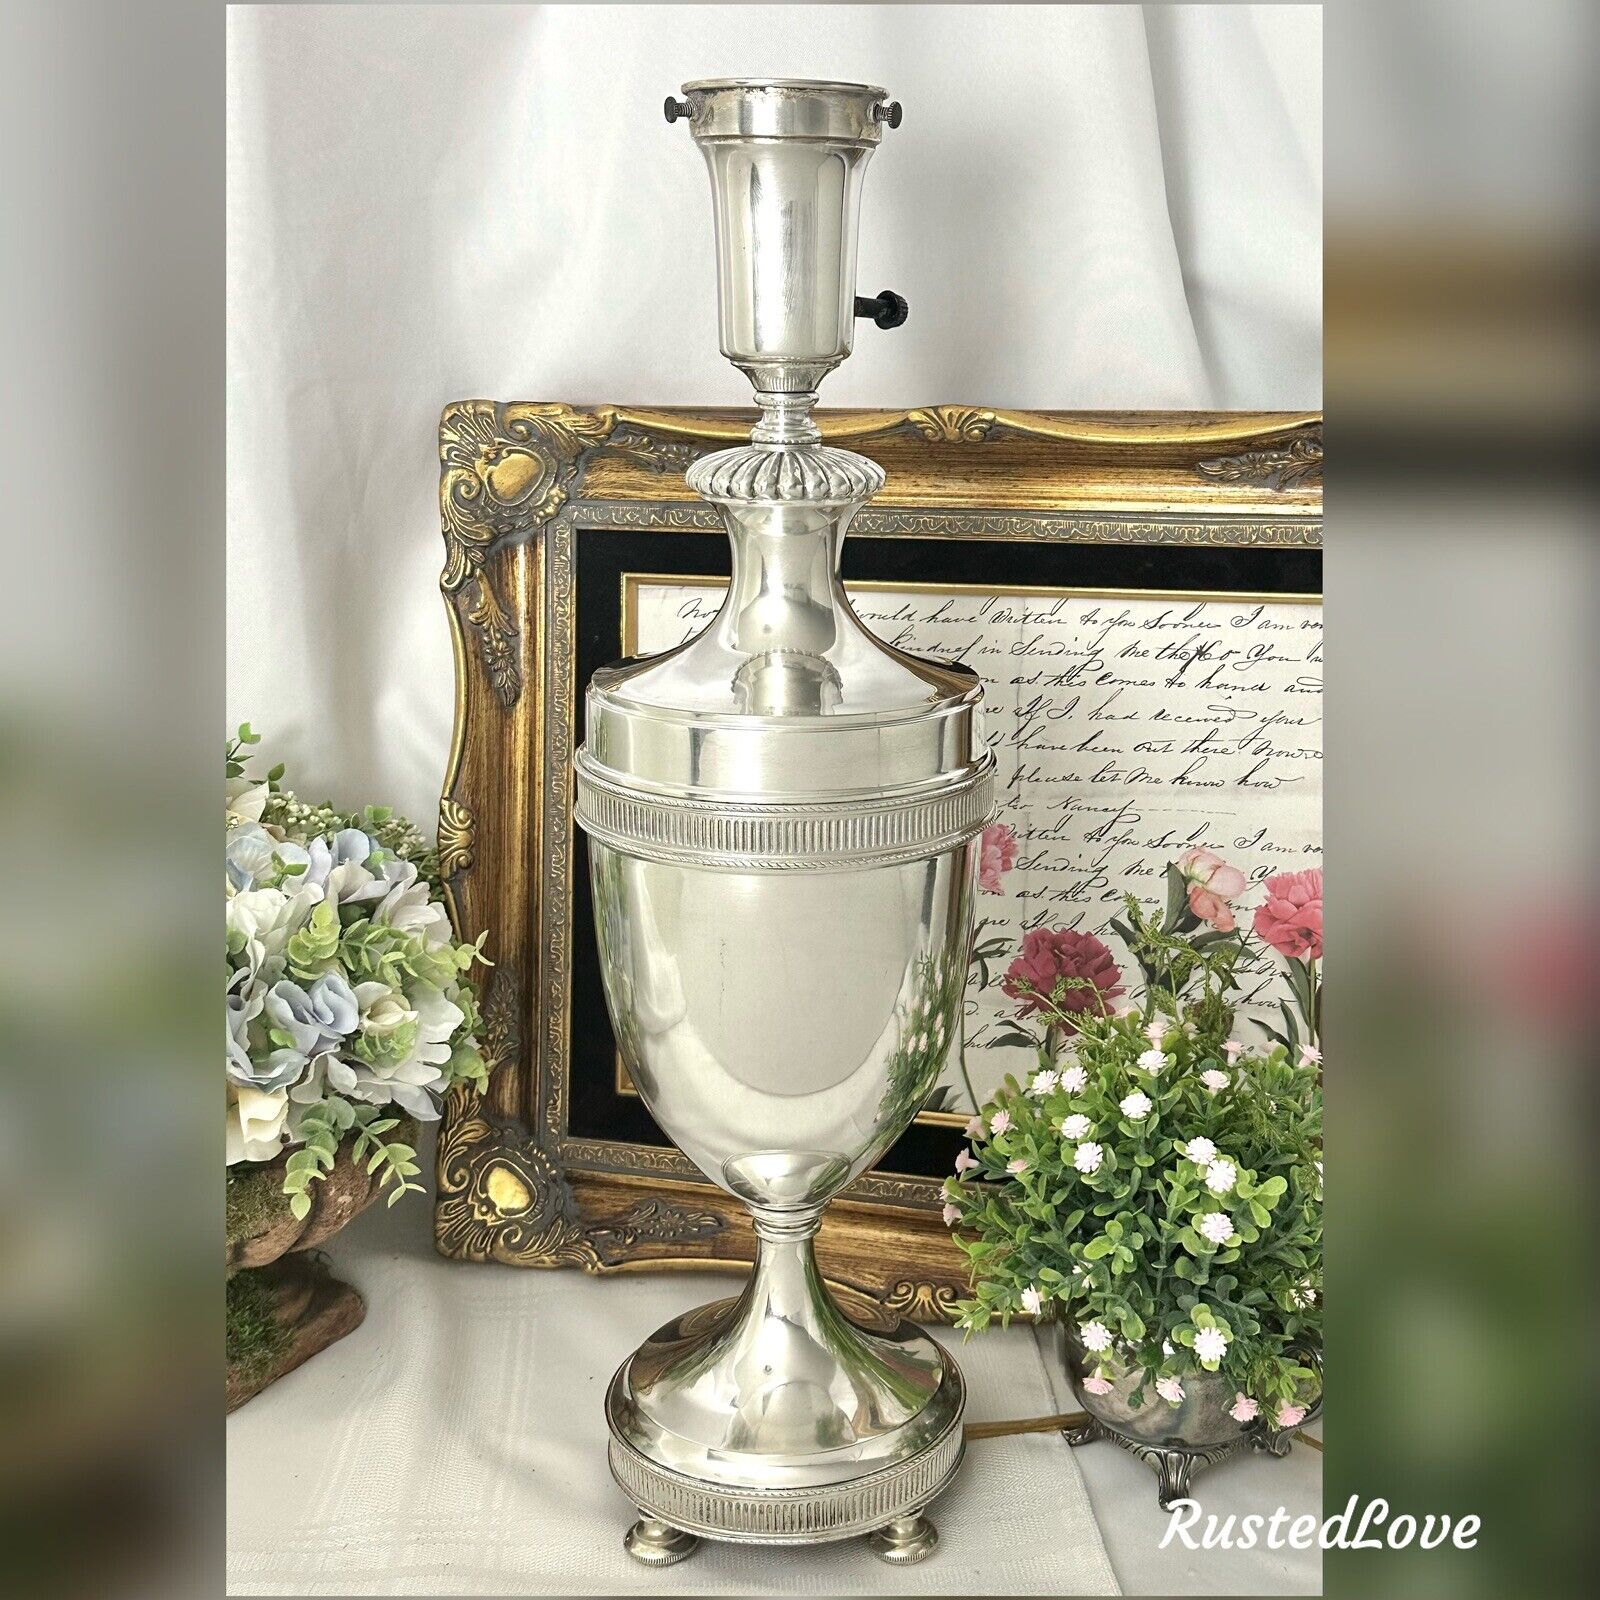 Silver Plated Lamp Neoclassical Styled Silverplated Large Urn Vintage Table Lamp